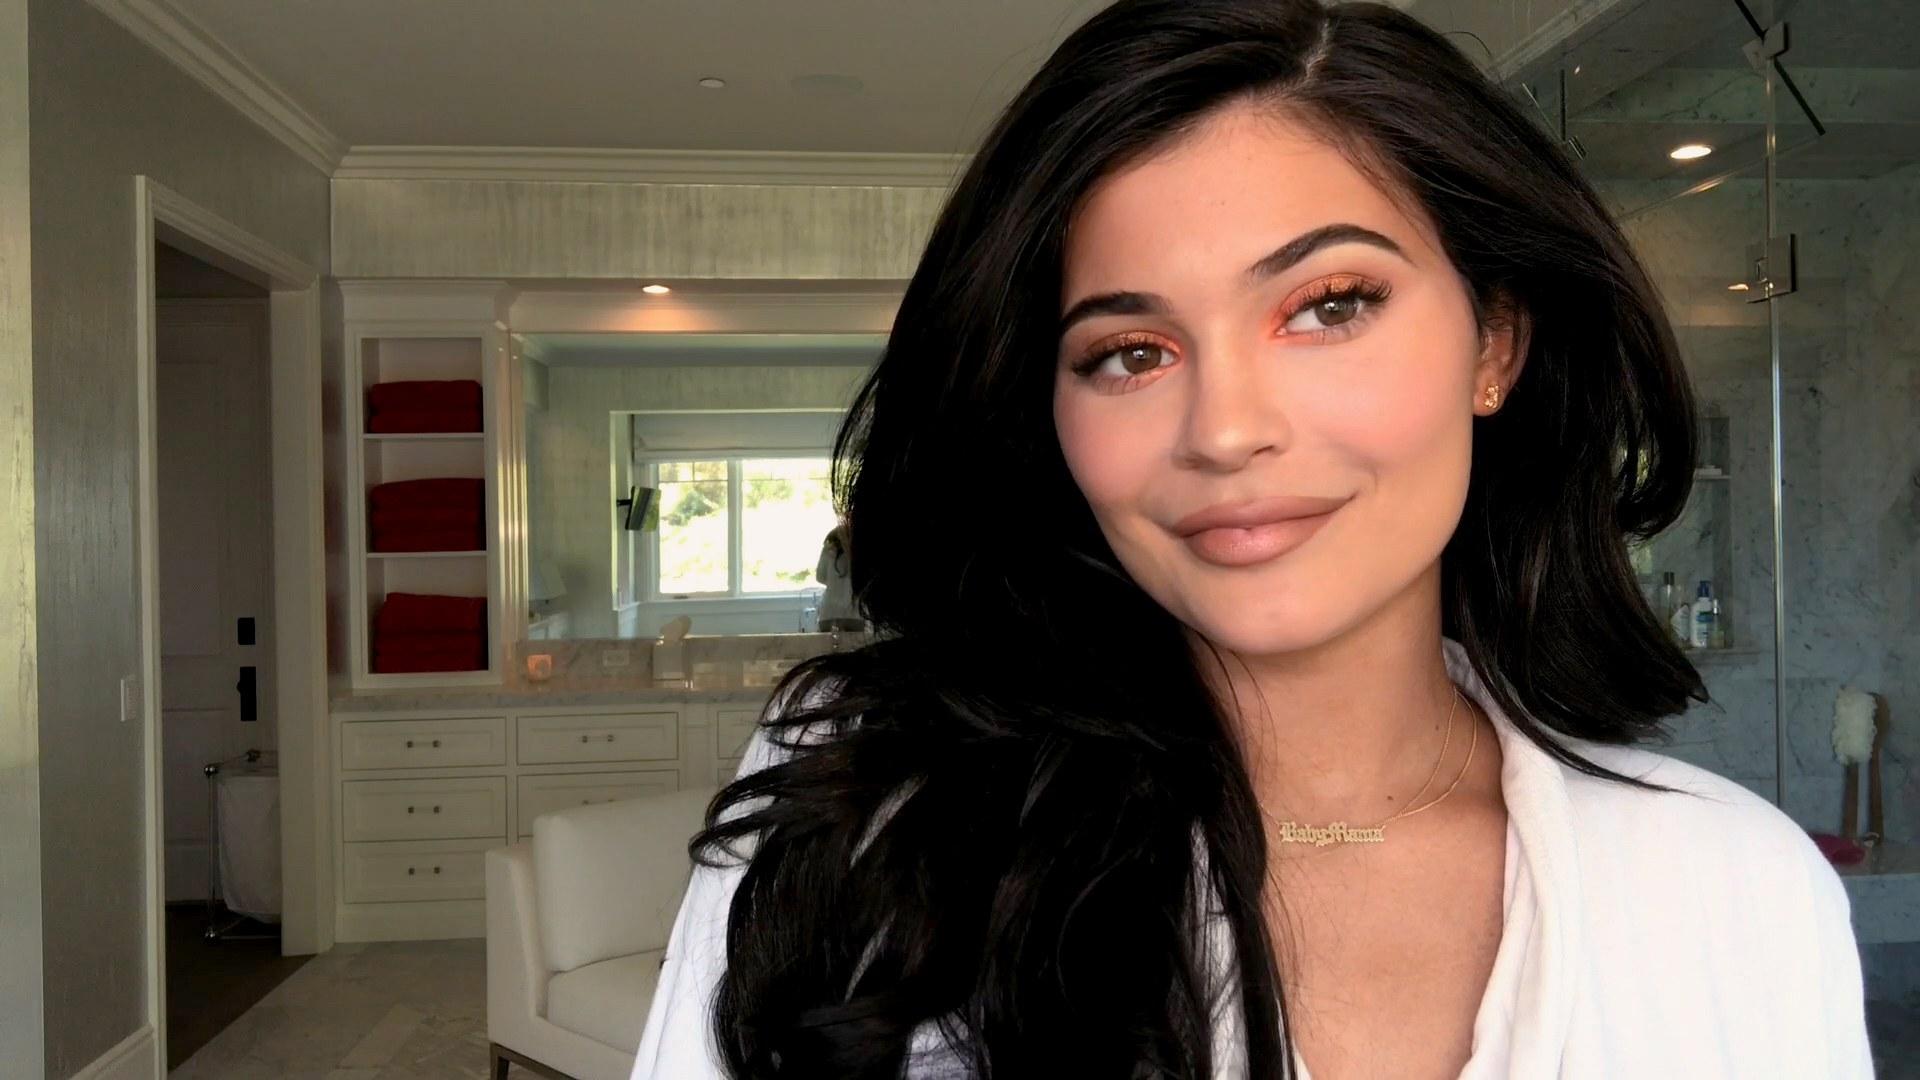 Watch Kylie Jenner's 10 Minute Guide To “The More Makeup The Better